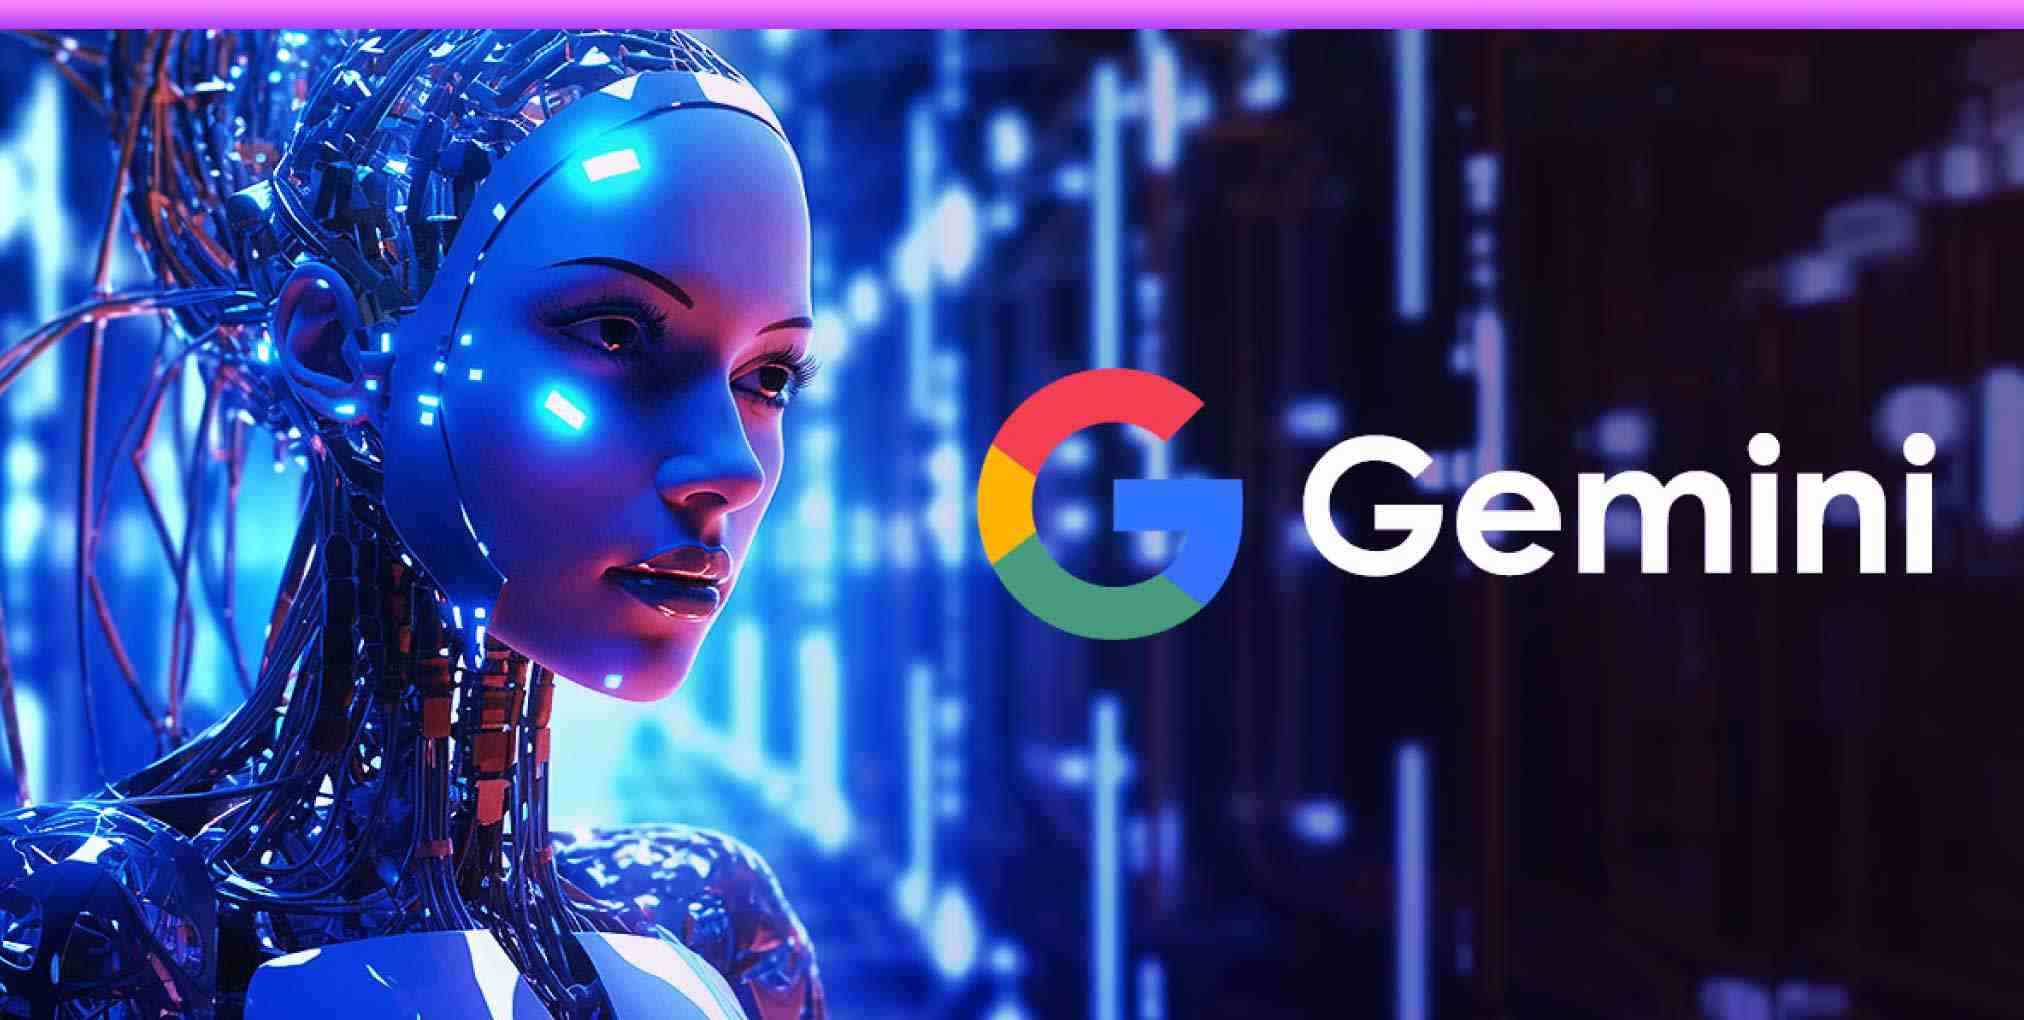 Google’s Gemini AI: Uses, Features, and Industry Impact